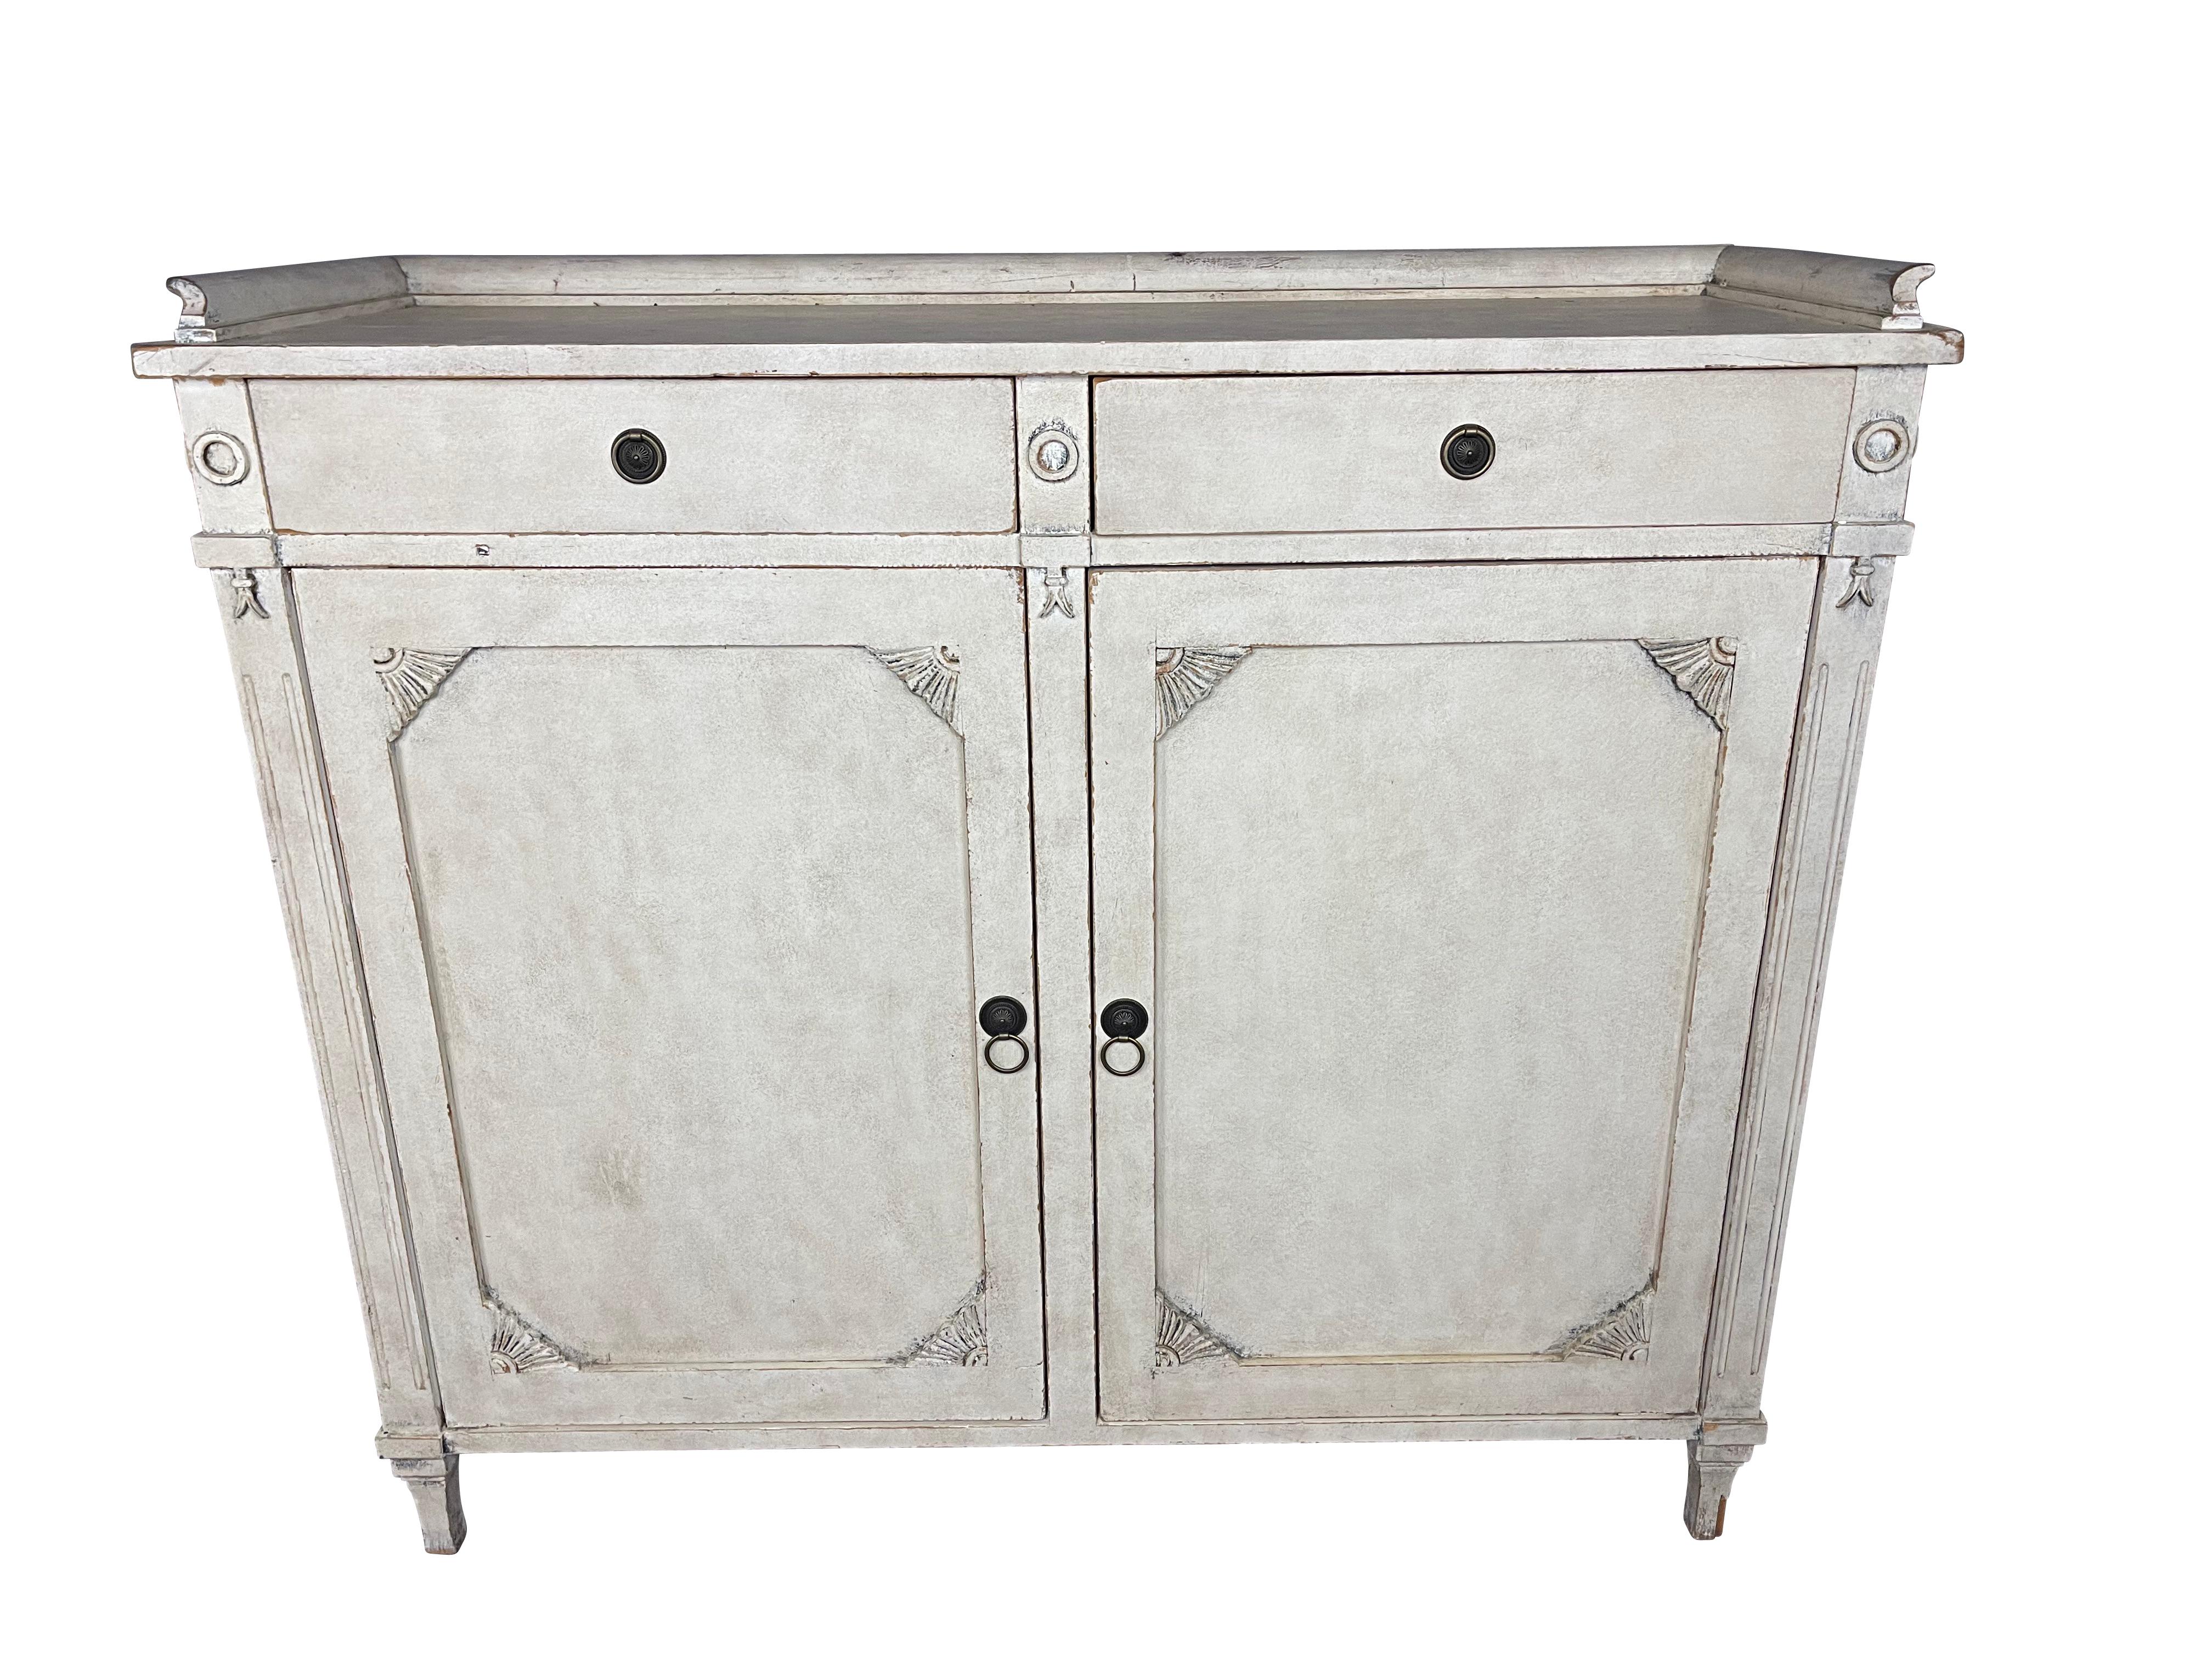 Gustavian-style buffet cupboard with original paint, 19th century, Sweden, circa 1840. Beige Lime Washed Cabinet, 3/4 gallery top above two frieze drawers over two paneled doors which open to reveal an interior shelf.
Sublime 19th century Swedish